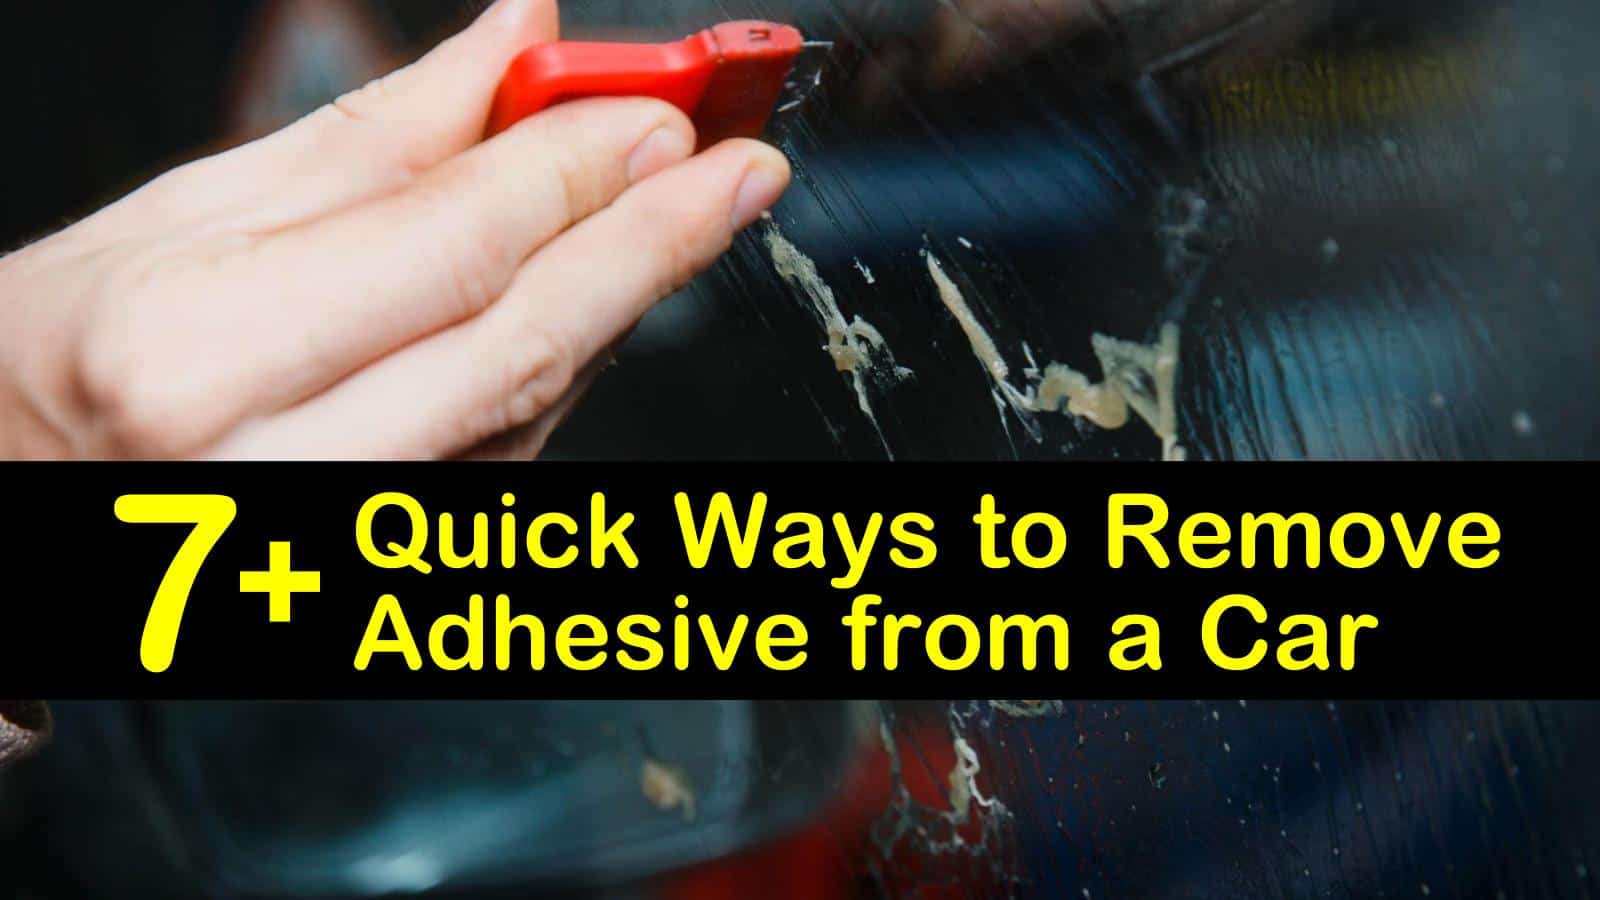 7+ Quick Ways to Remove Adhesive from a Car